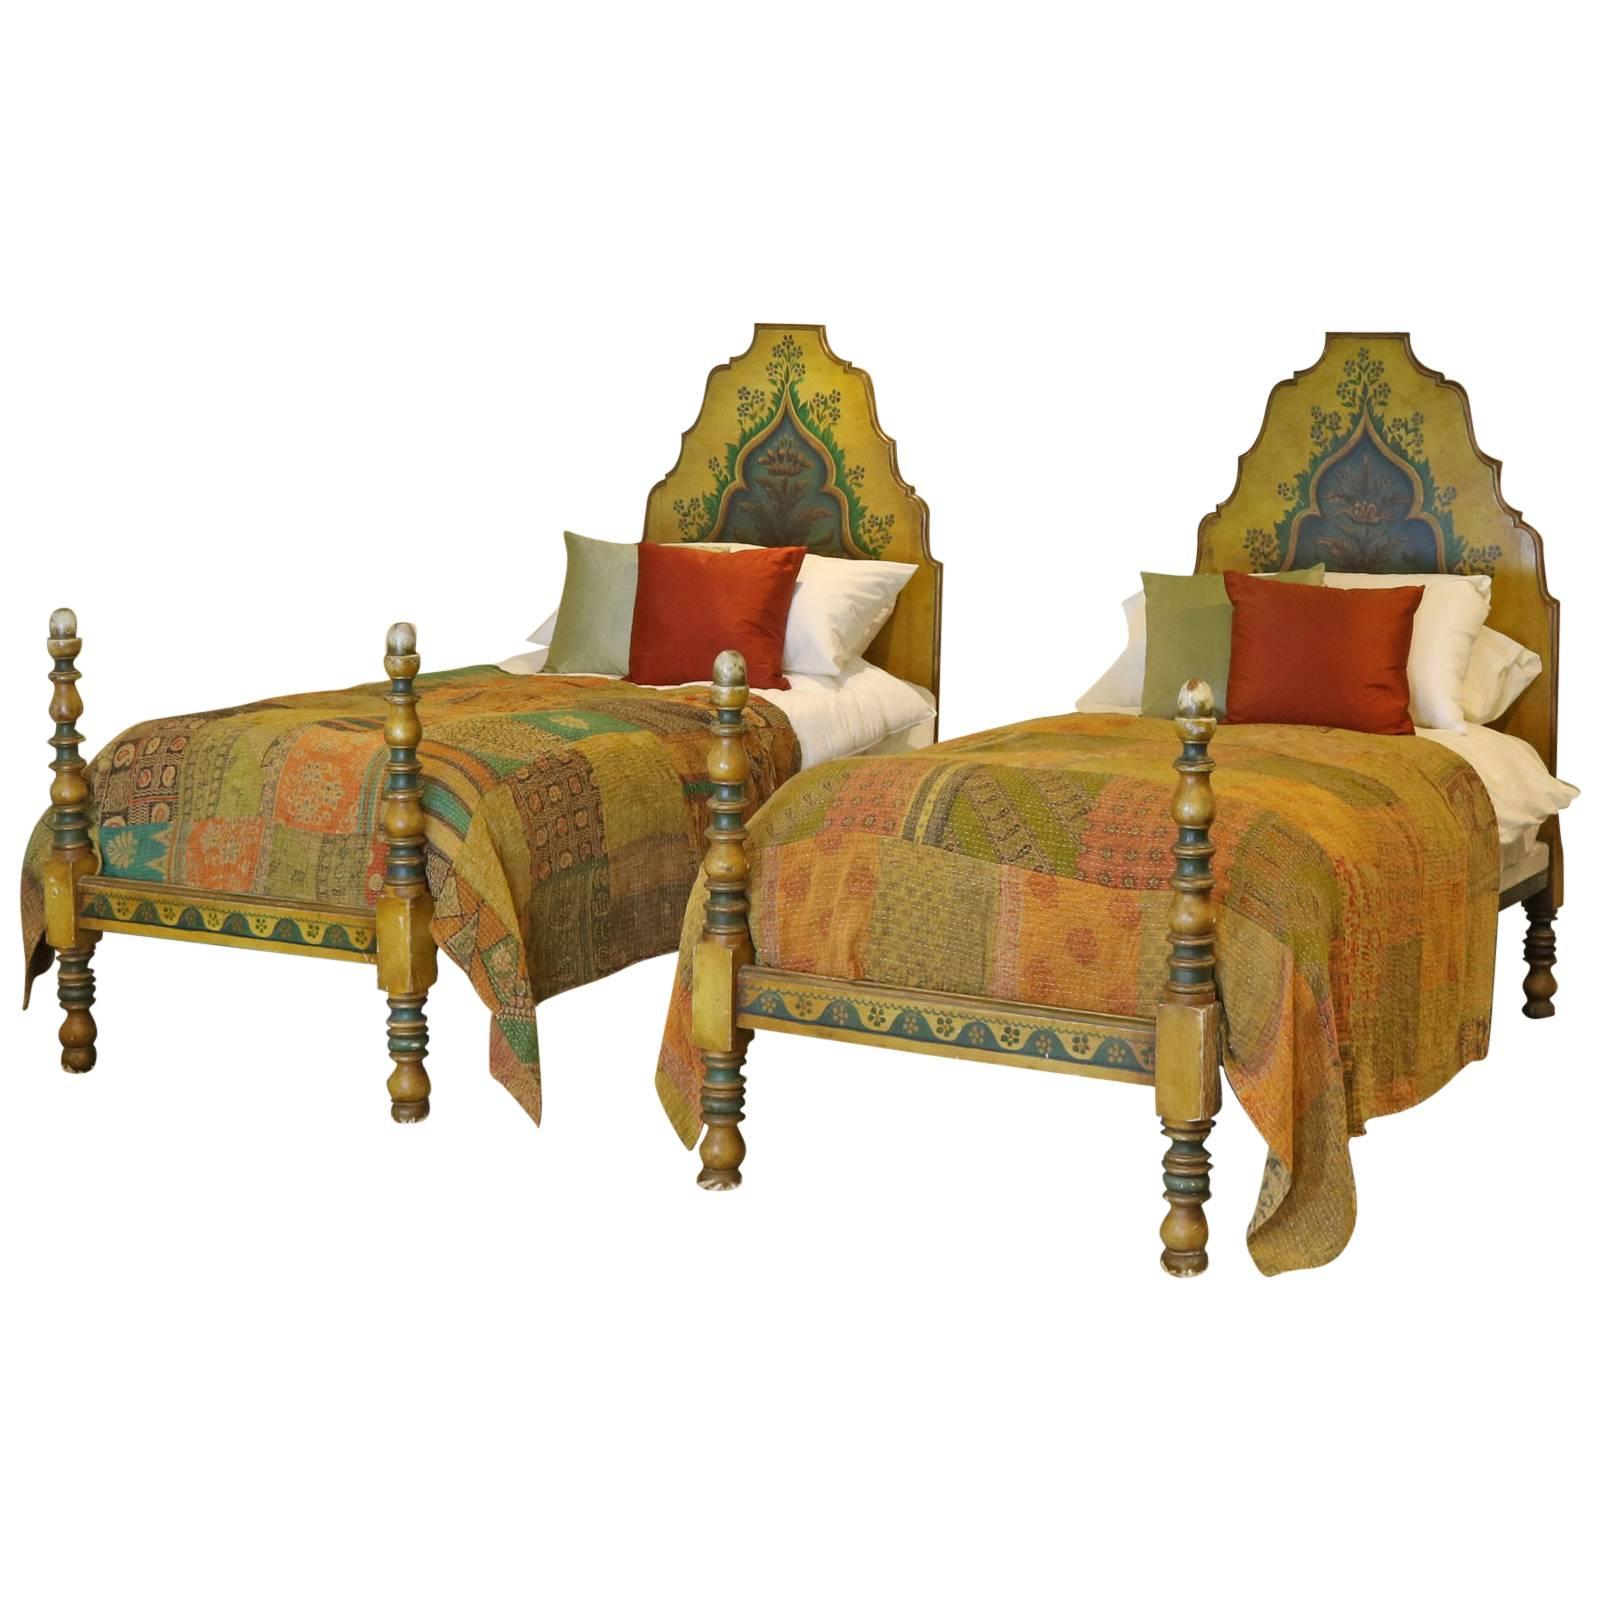 Matching Pair of Bauernmalerei Bavarian Hand Painted Beds